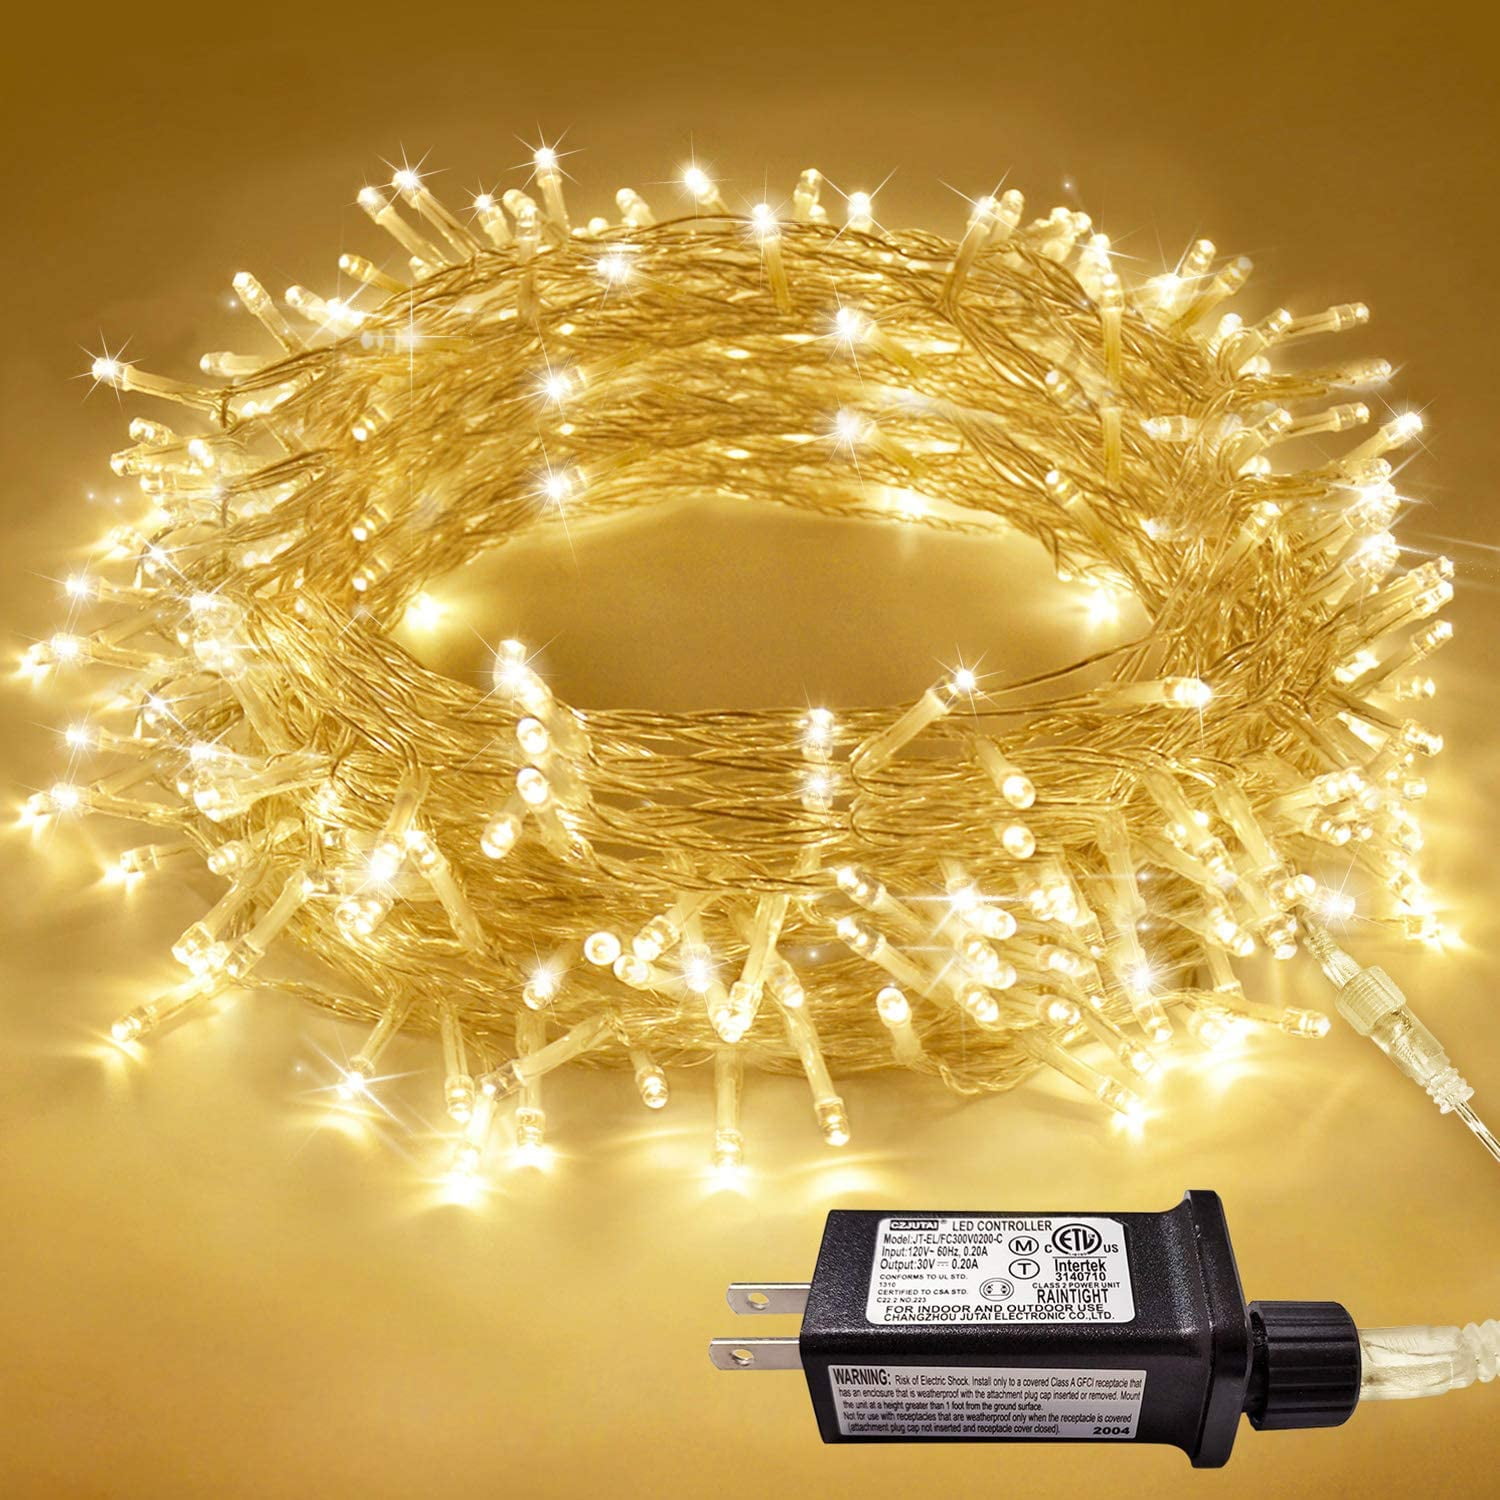 300 LED String Lights Indoor Outdoor, Clear Warm White Christmas Lights with 8 Modes, Plug in Fairy String Lights f - Walmart.com